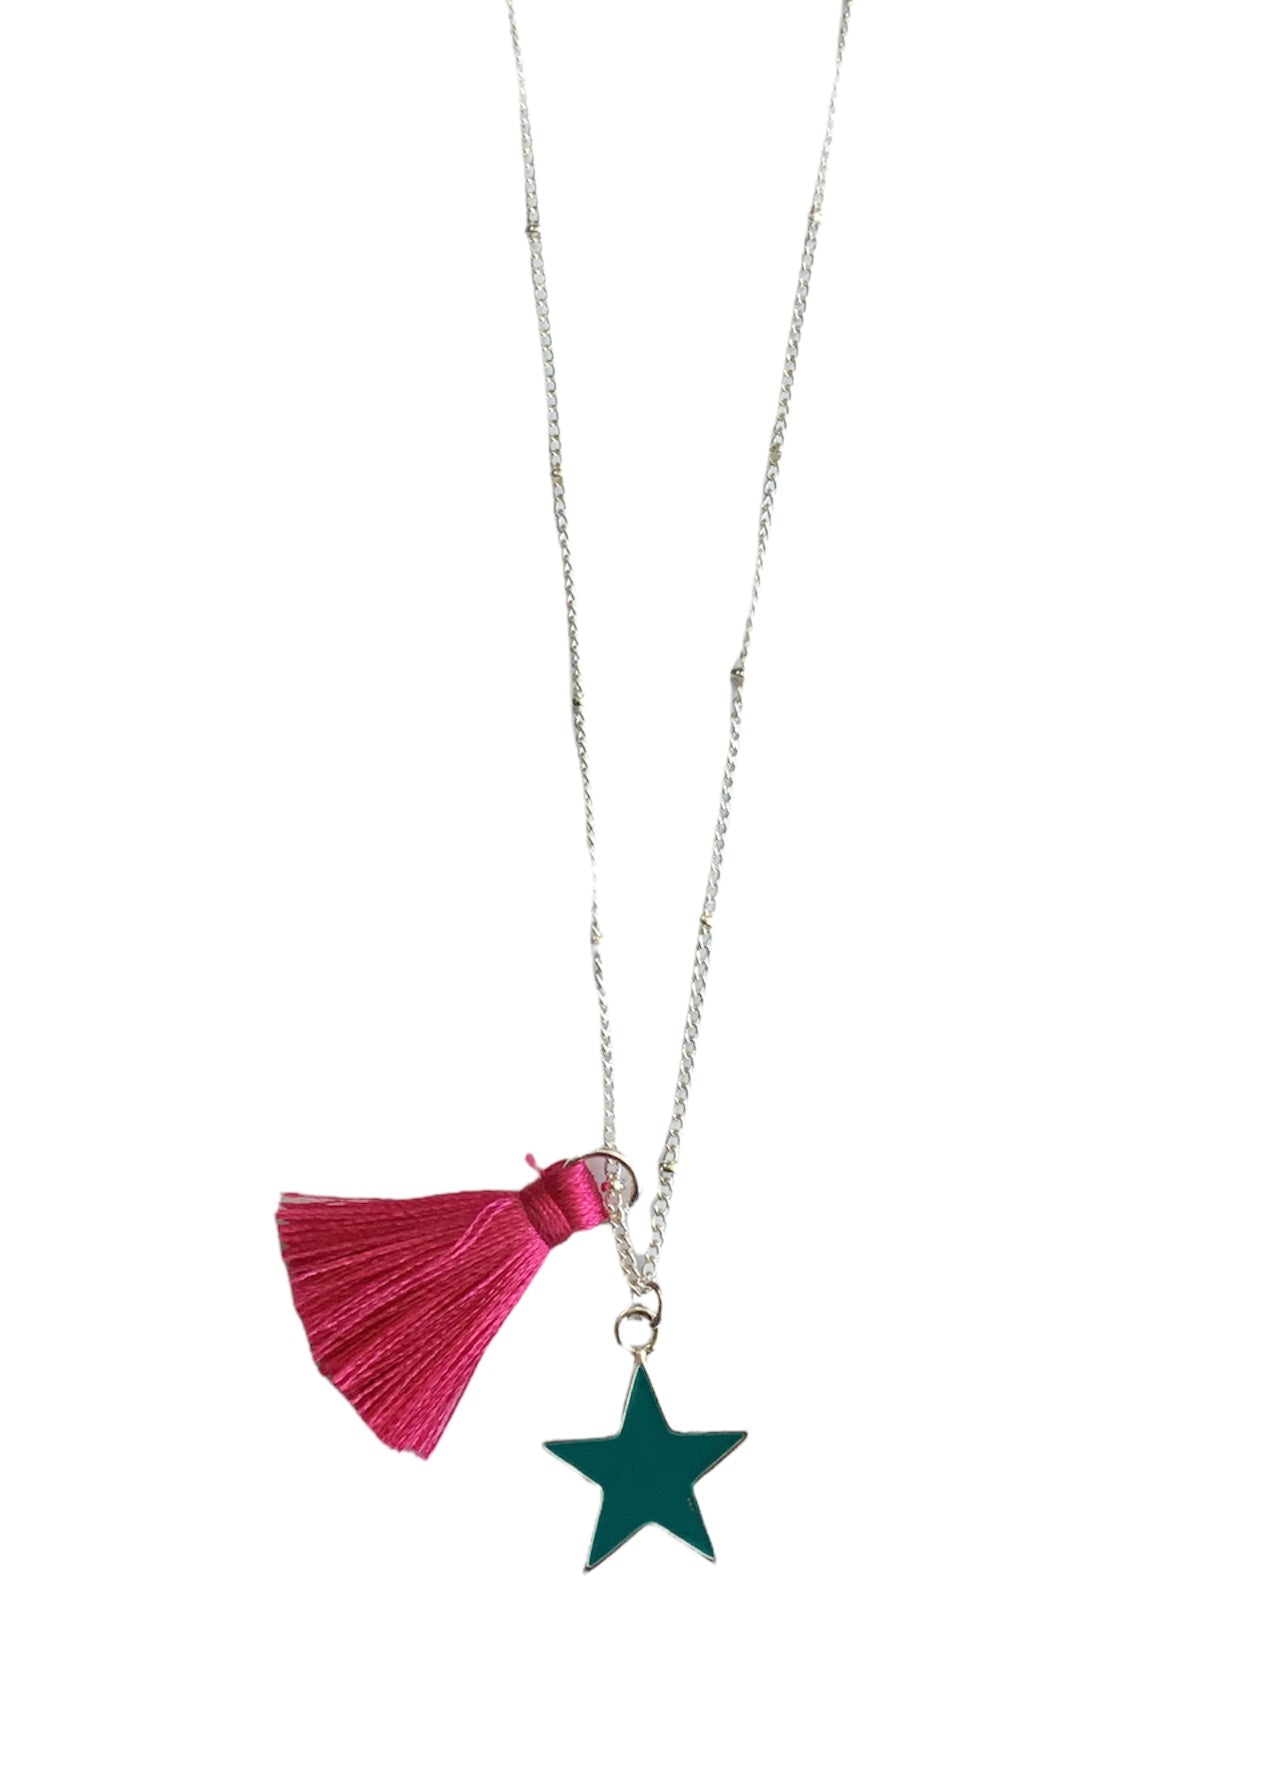 Silver plated Fuchsia Tassel Necklace with Turquoise Star